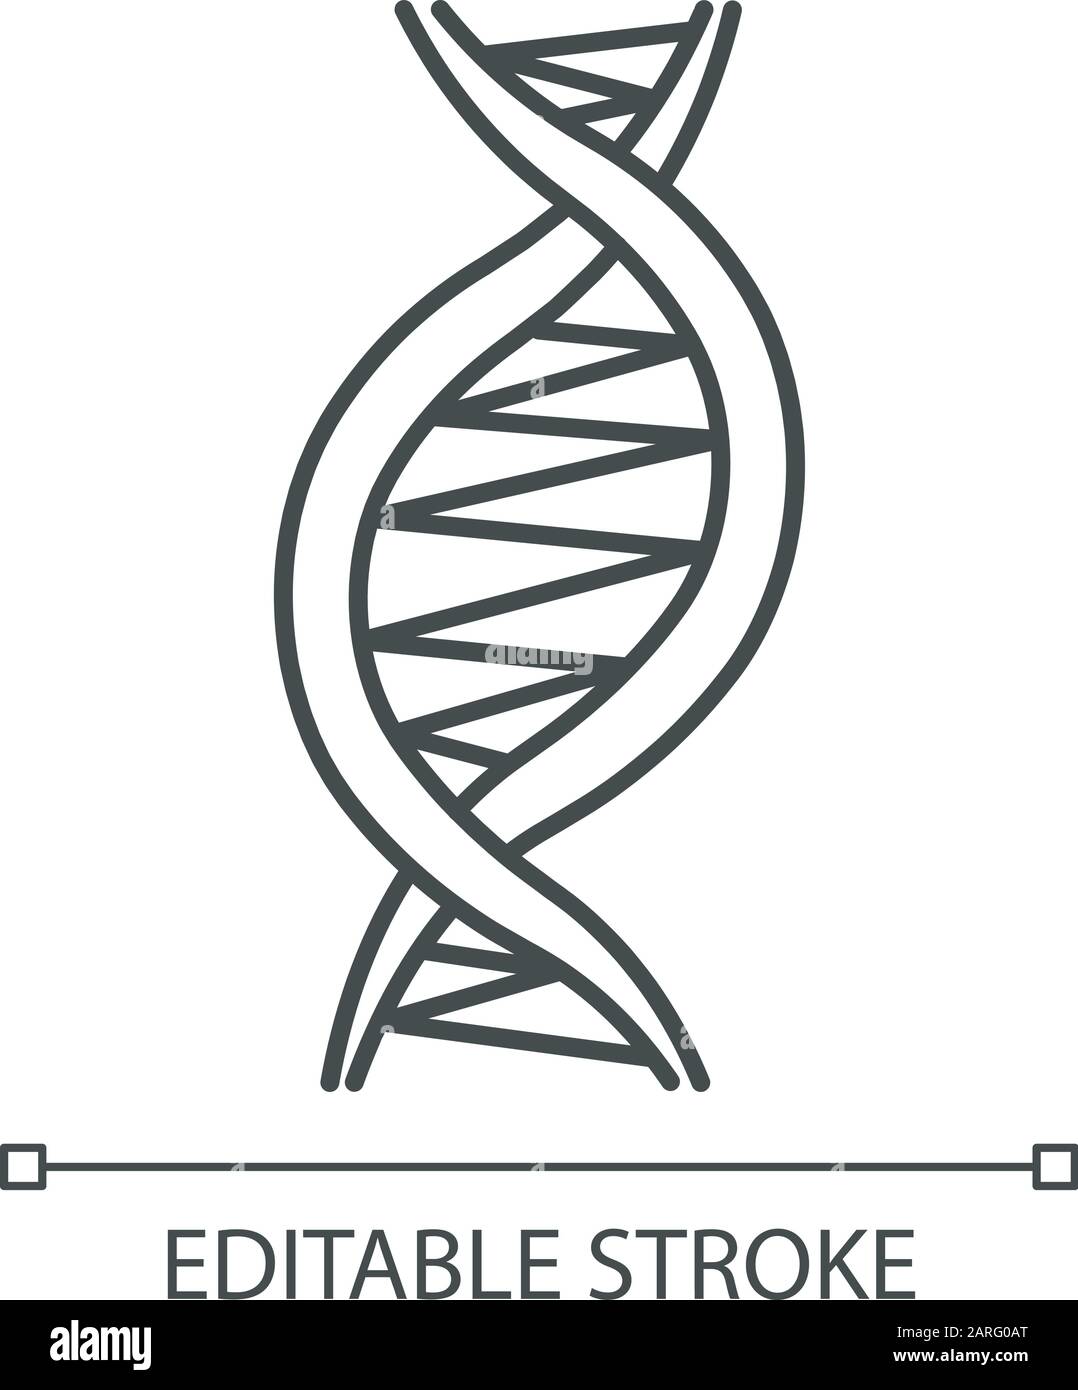 Left-handed DNA helix linear icon. Z-DNA. Deoxyribonucleic, nucleic acid structure. Genetic code. Genetics. Thin line illustration. Contour symbol. Ve Stock Vector